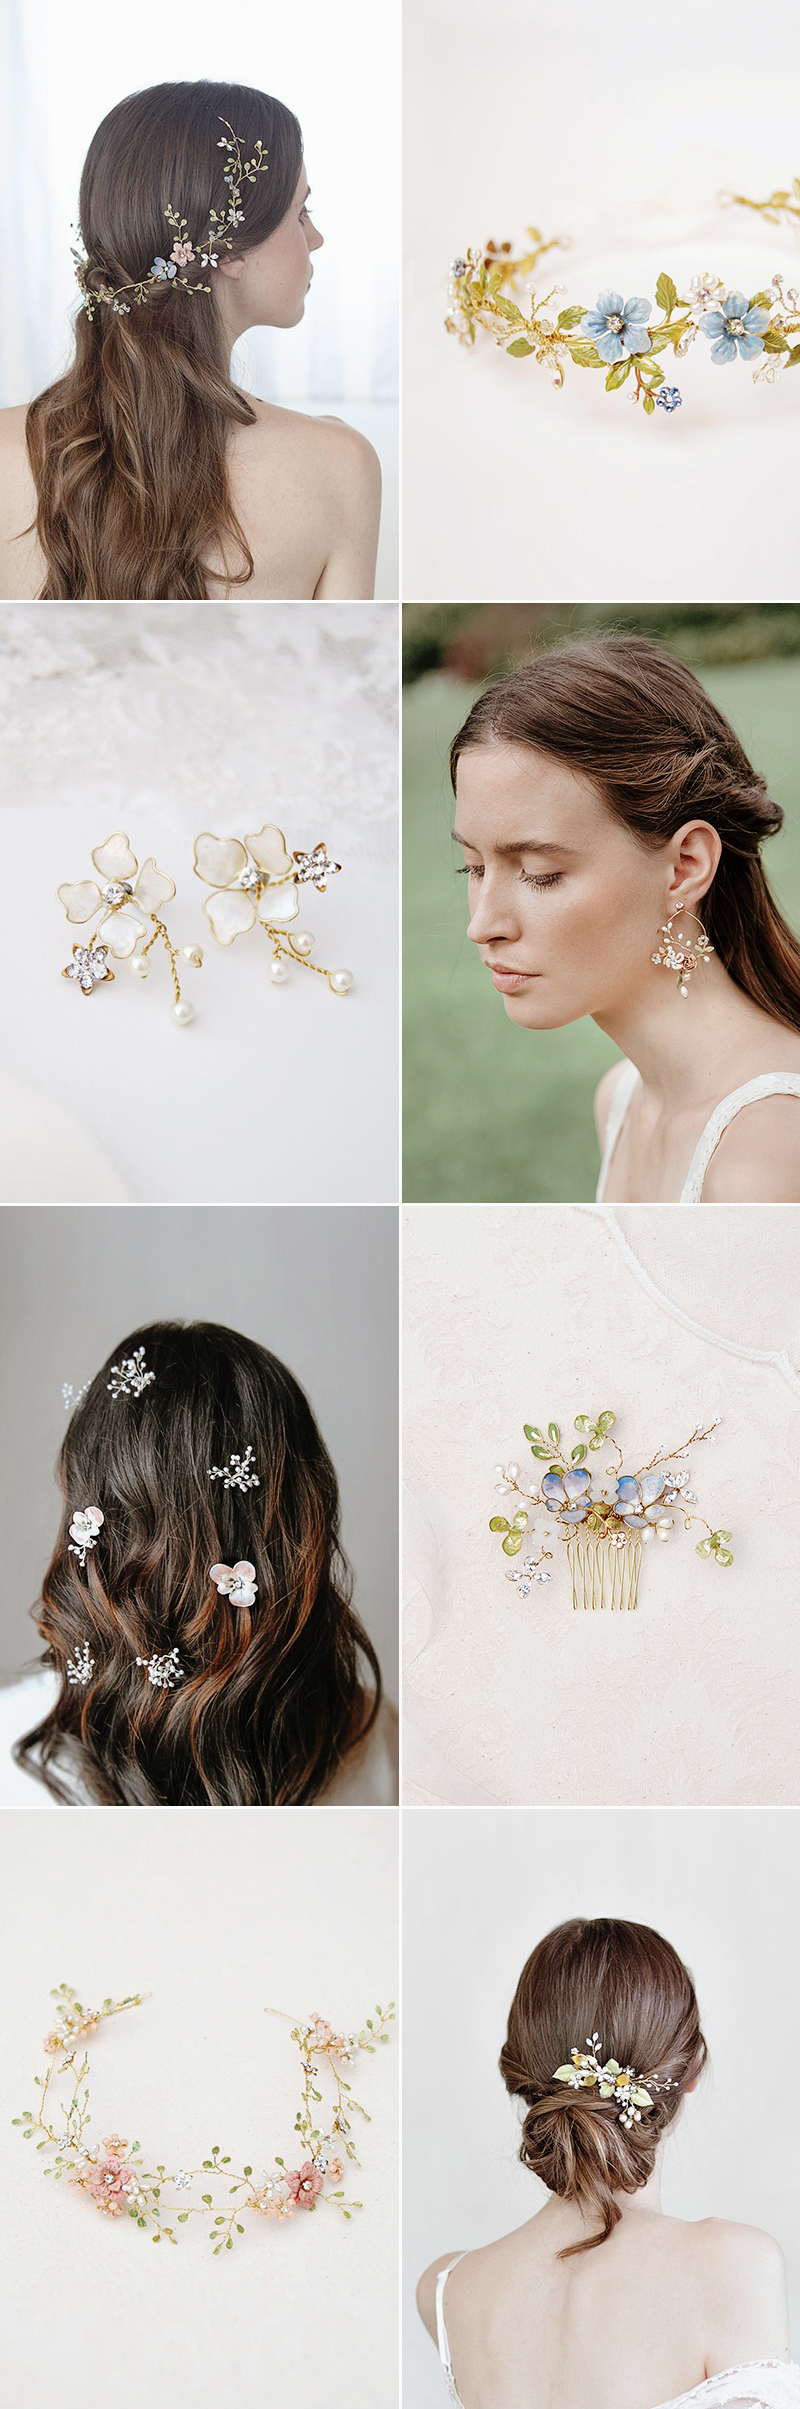 34 Nature-Inspired Bridal Accessories For The Romantic Bride